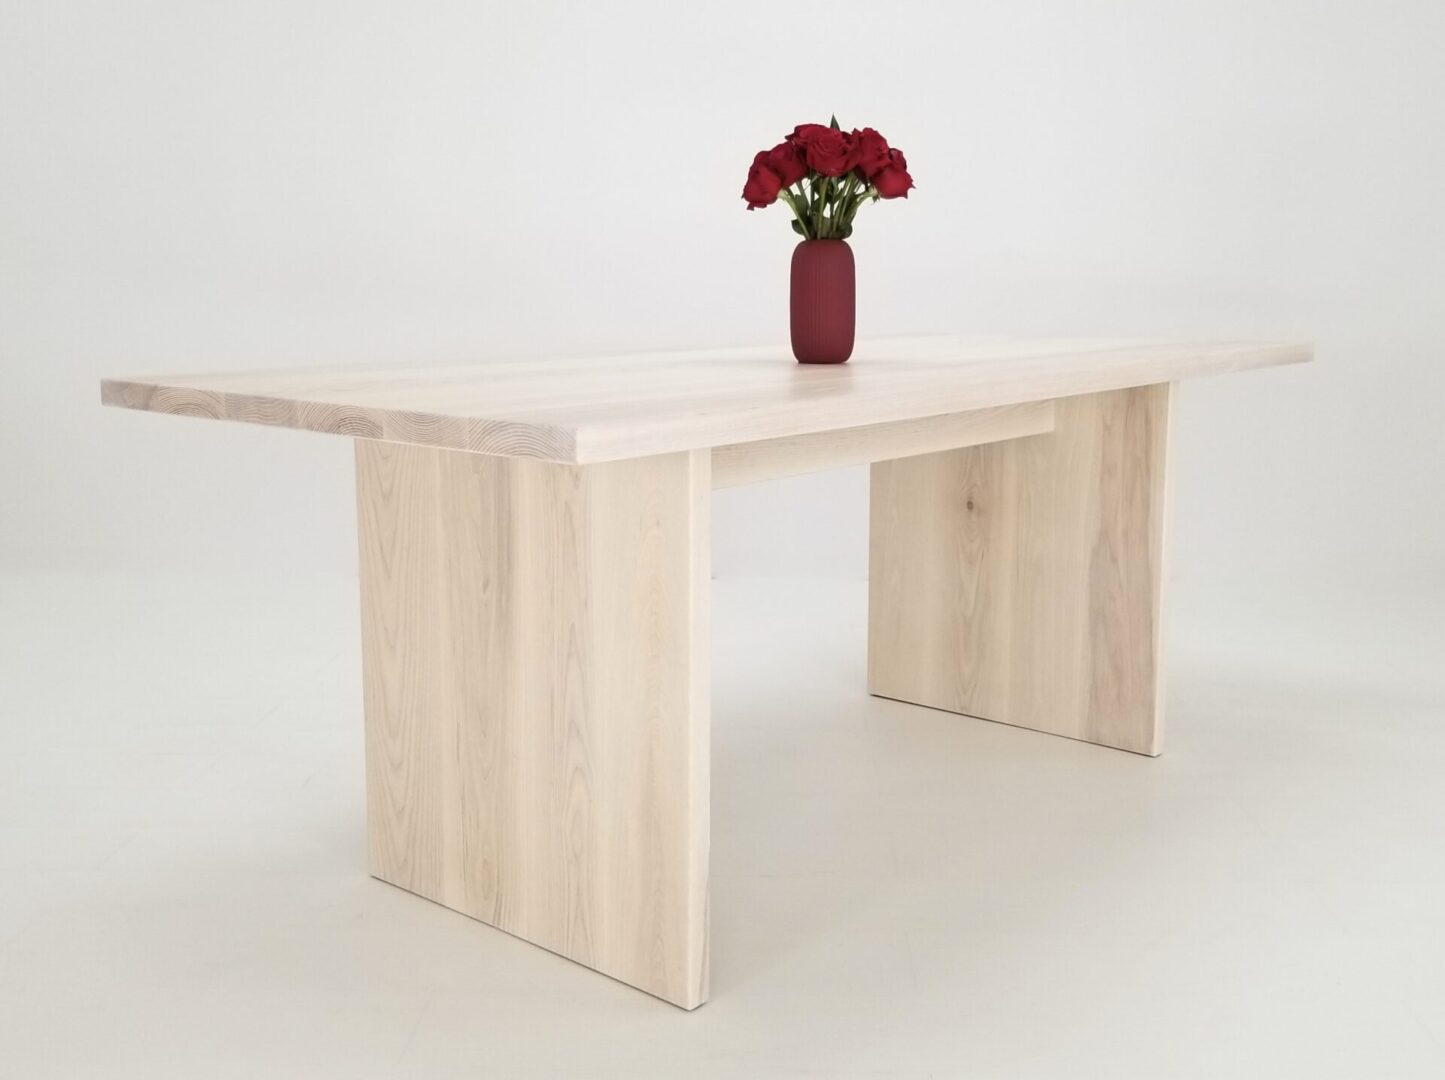 A white wood LILY 1.5 panel dining table with flowers in a vase.